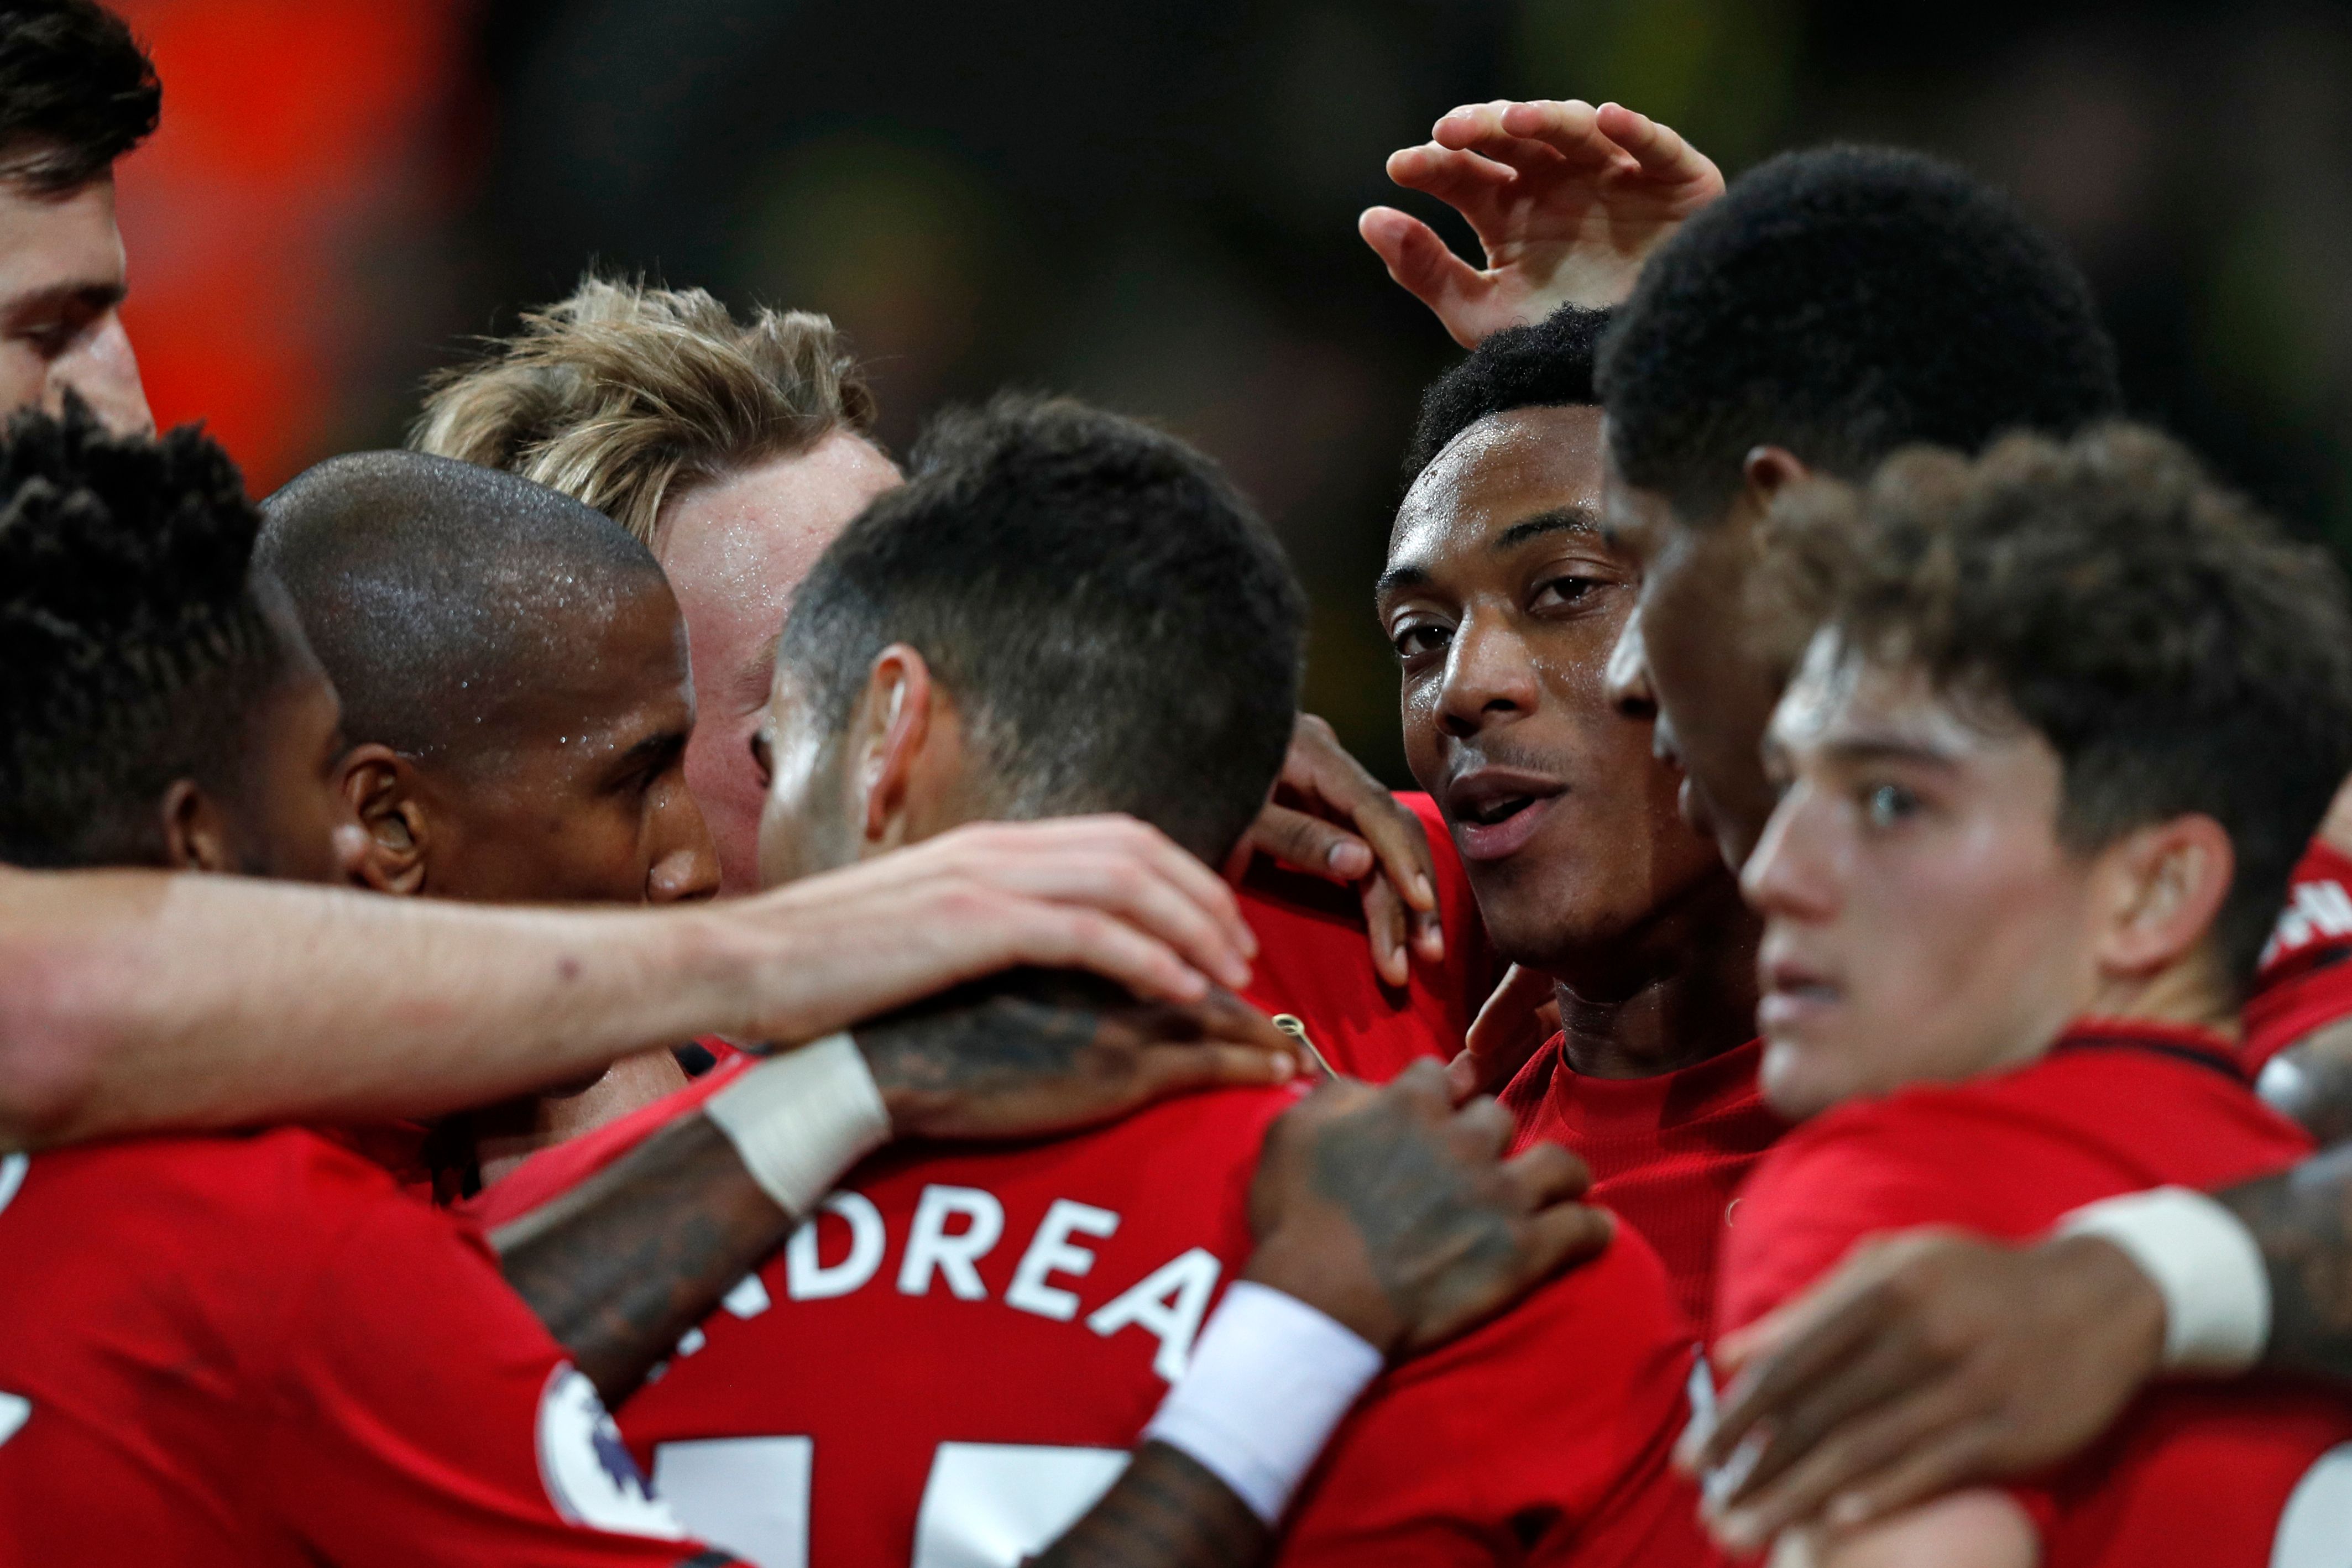 Manchester United's French striker Anthony Martial (C) celebrates with teammates after scoring their third goal during the English Premier League football match between Norwich City and Manchester United at Carrow Road in Norwich, eastern England on October 27, 2019. (Photo by Adrian DENNIS / AFP) / RESTRICTED TO EDITORIAL USE. No use with unauthorized audio, video, data, fixture lists, club/league logos or 'live' services. Online in-match use limited to 120 images. An additional 40 images may be used in extra time. No video emulation. Social media in-match use limited to 120 images. An additional 40 images may be used in extra time. No use in betting publications, games or single club/league/player publications. /  (Photo by ADRIAN DENNIS/AFP via Getty Images)